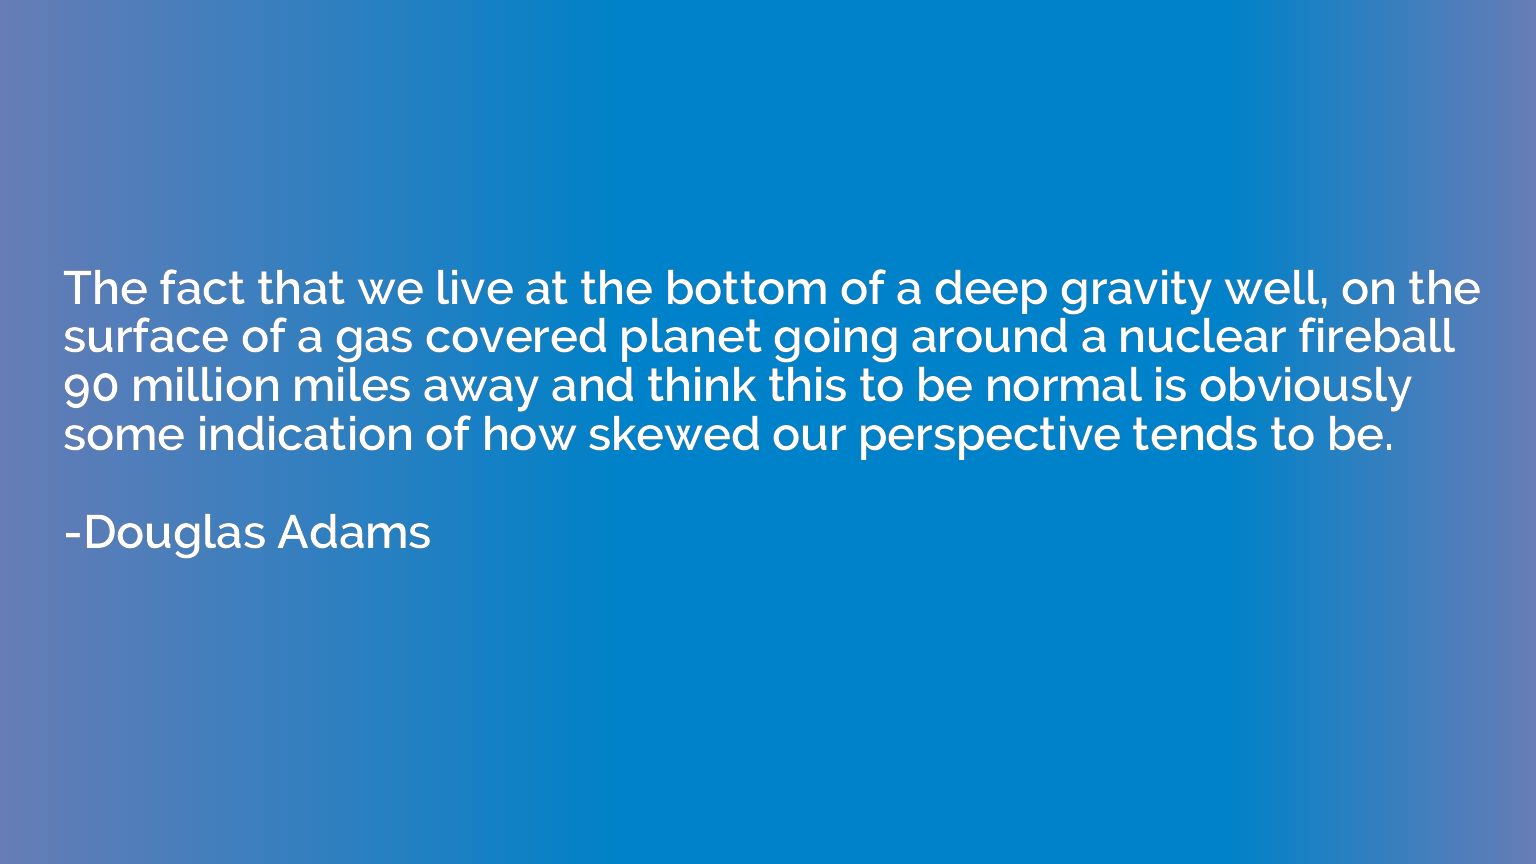 The fact that we live at the bottom of a deep gravity well, 